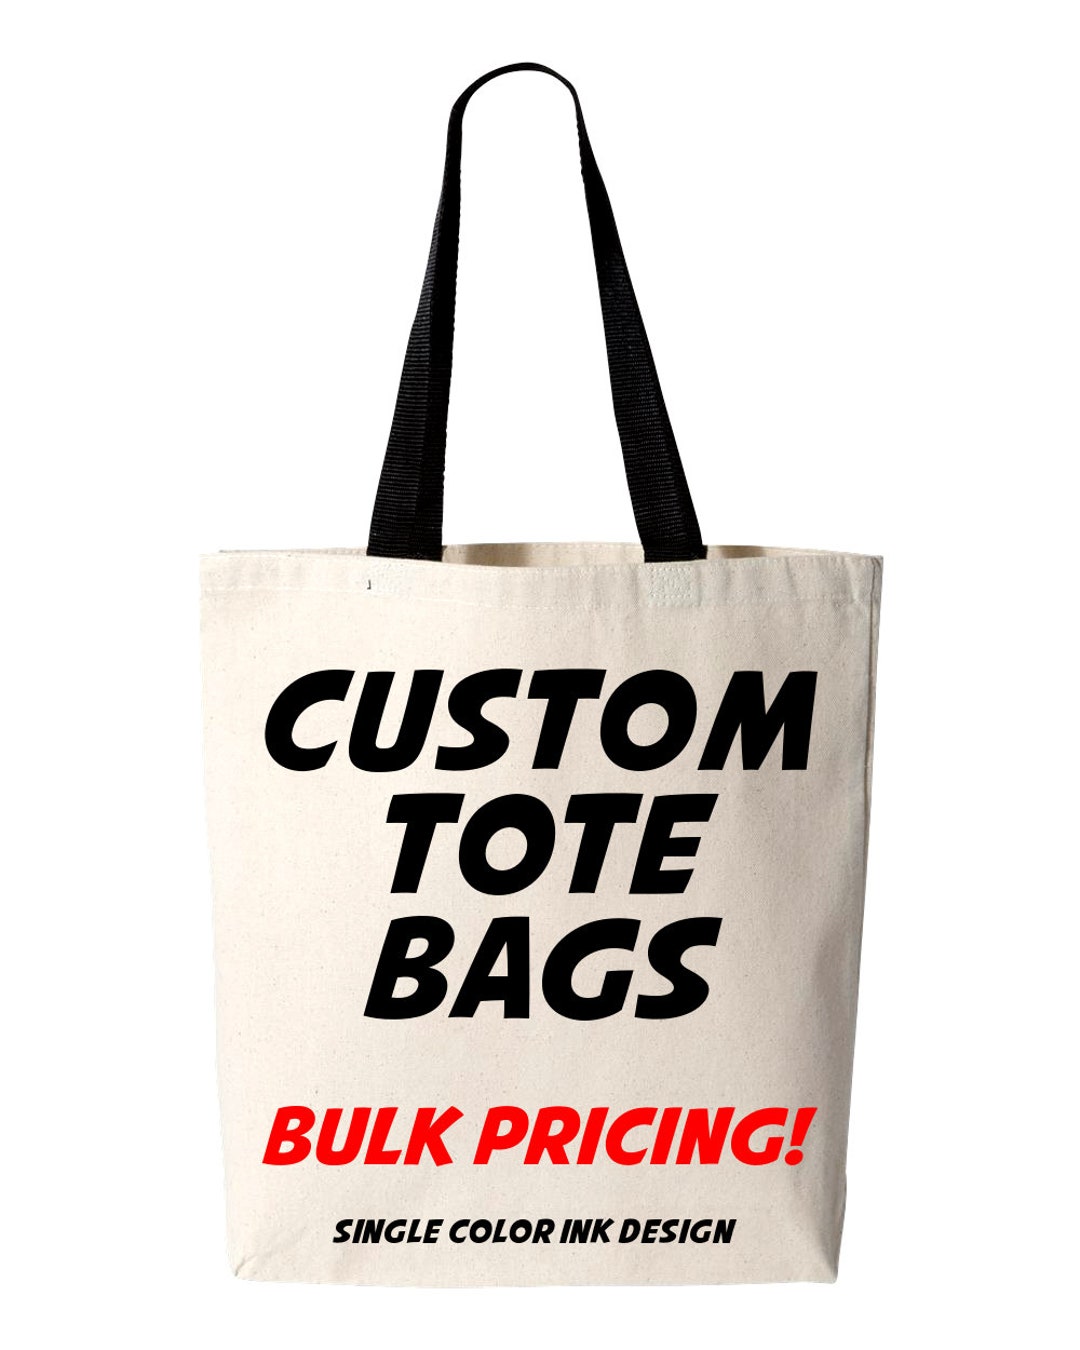 Custom Tote Bags, Bulk Tote Bags, Wholesale Totes, Custom Wedding Totes, Bridal, Event, 6 oz Lightweight Promotional, Cotton Canvas Book